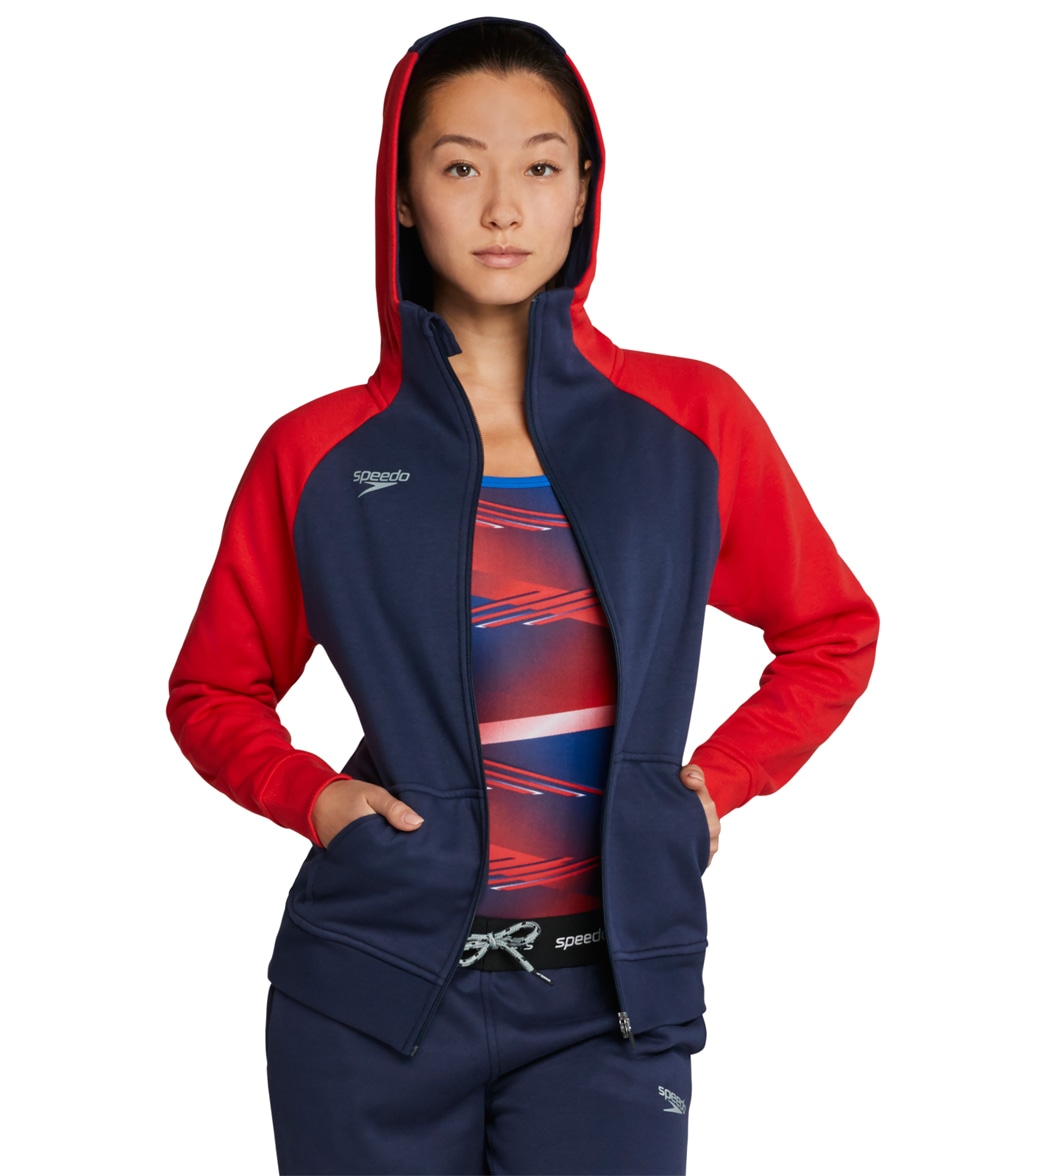 Speedo Women's Team Jacket - Red/White/Blue Large Size Large Cotton/Polyester - Swimoutlet.com